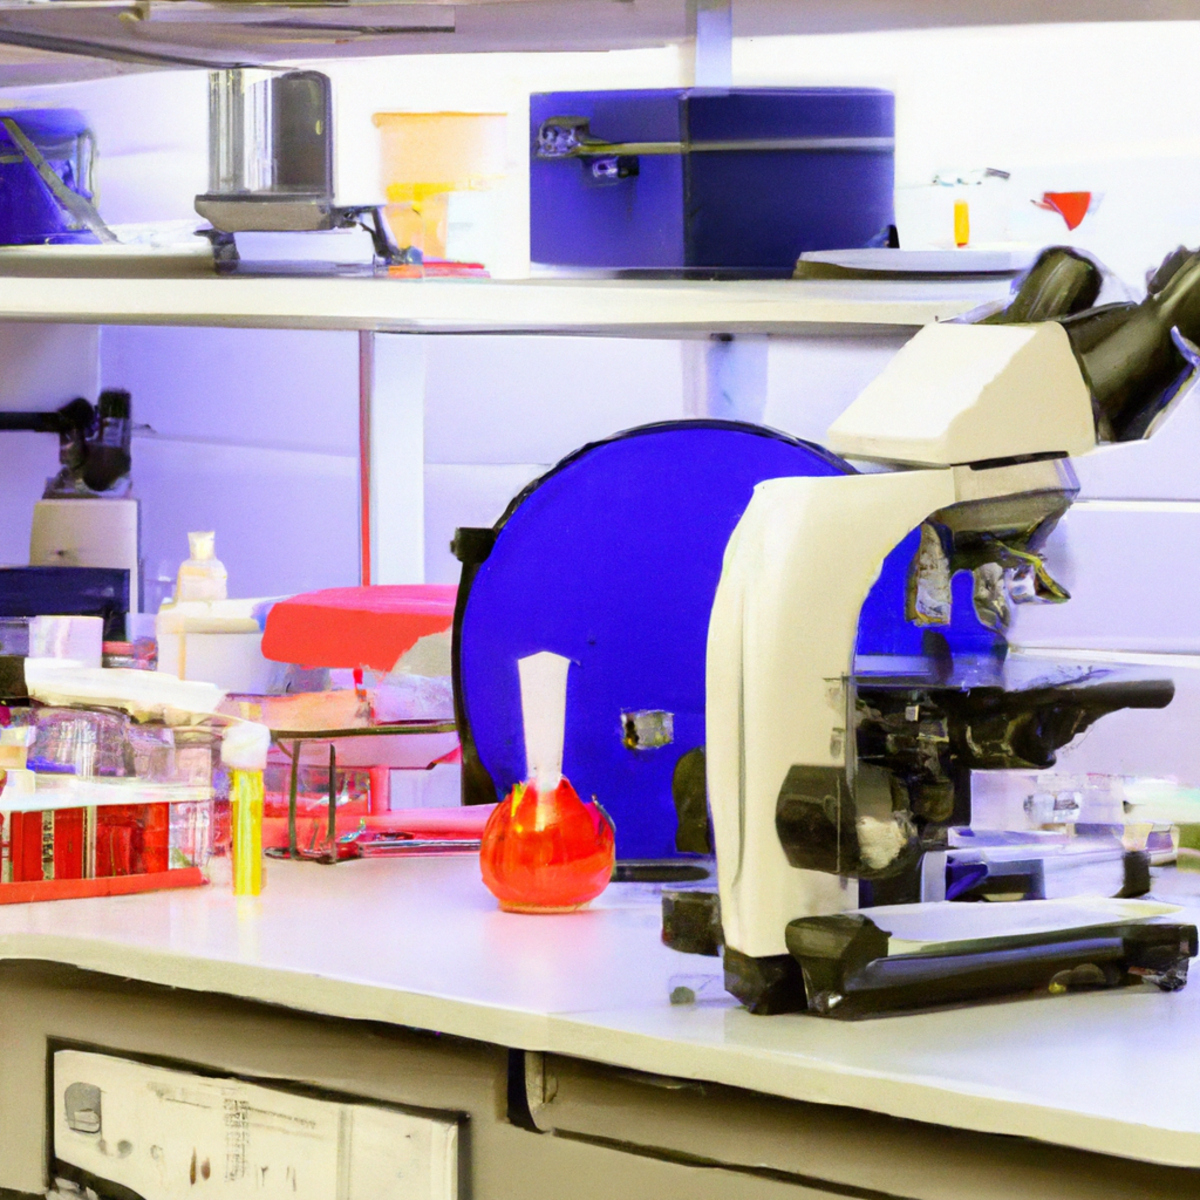 Well-equipped laboratory bench with scientific instruments, emphasizing dedication and progress in Sotos Syndrome research.